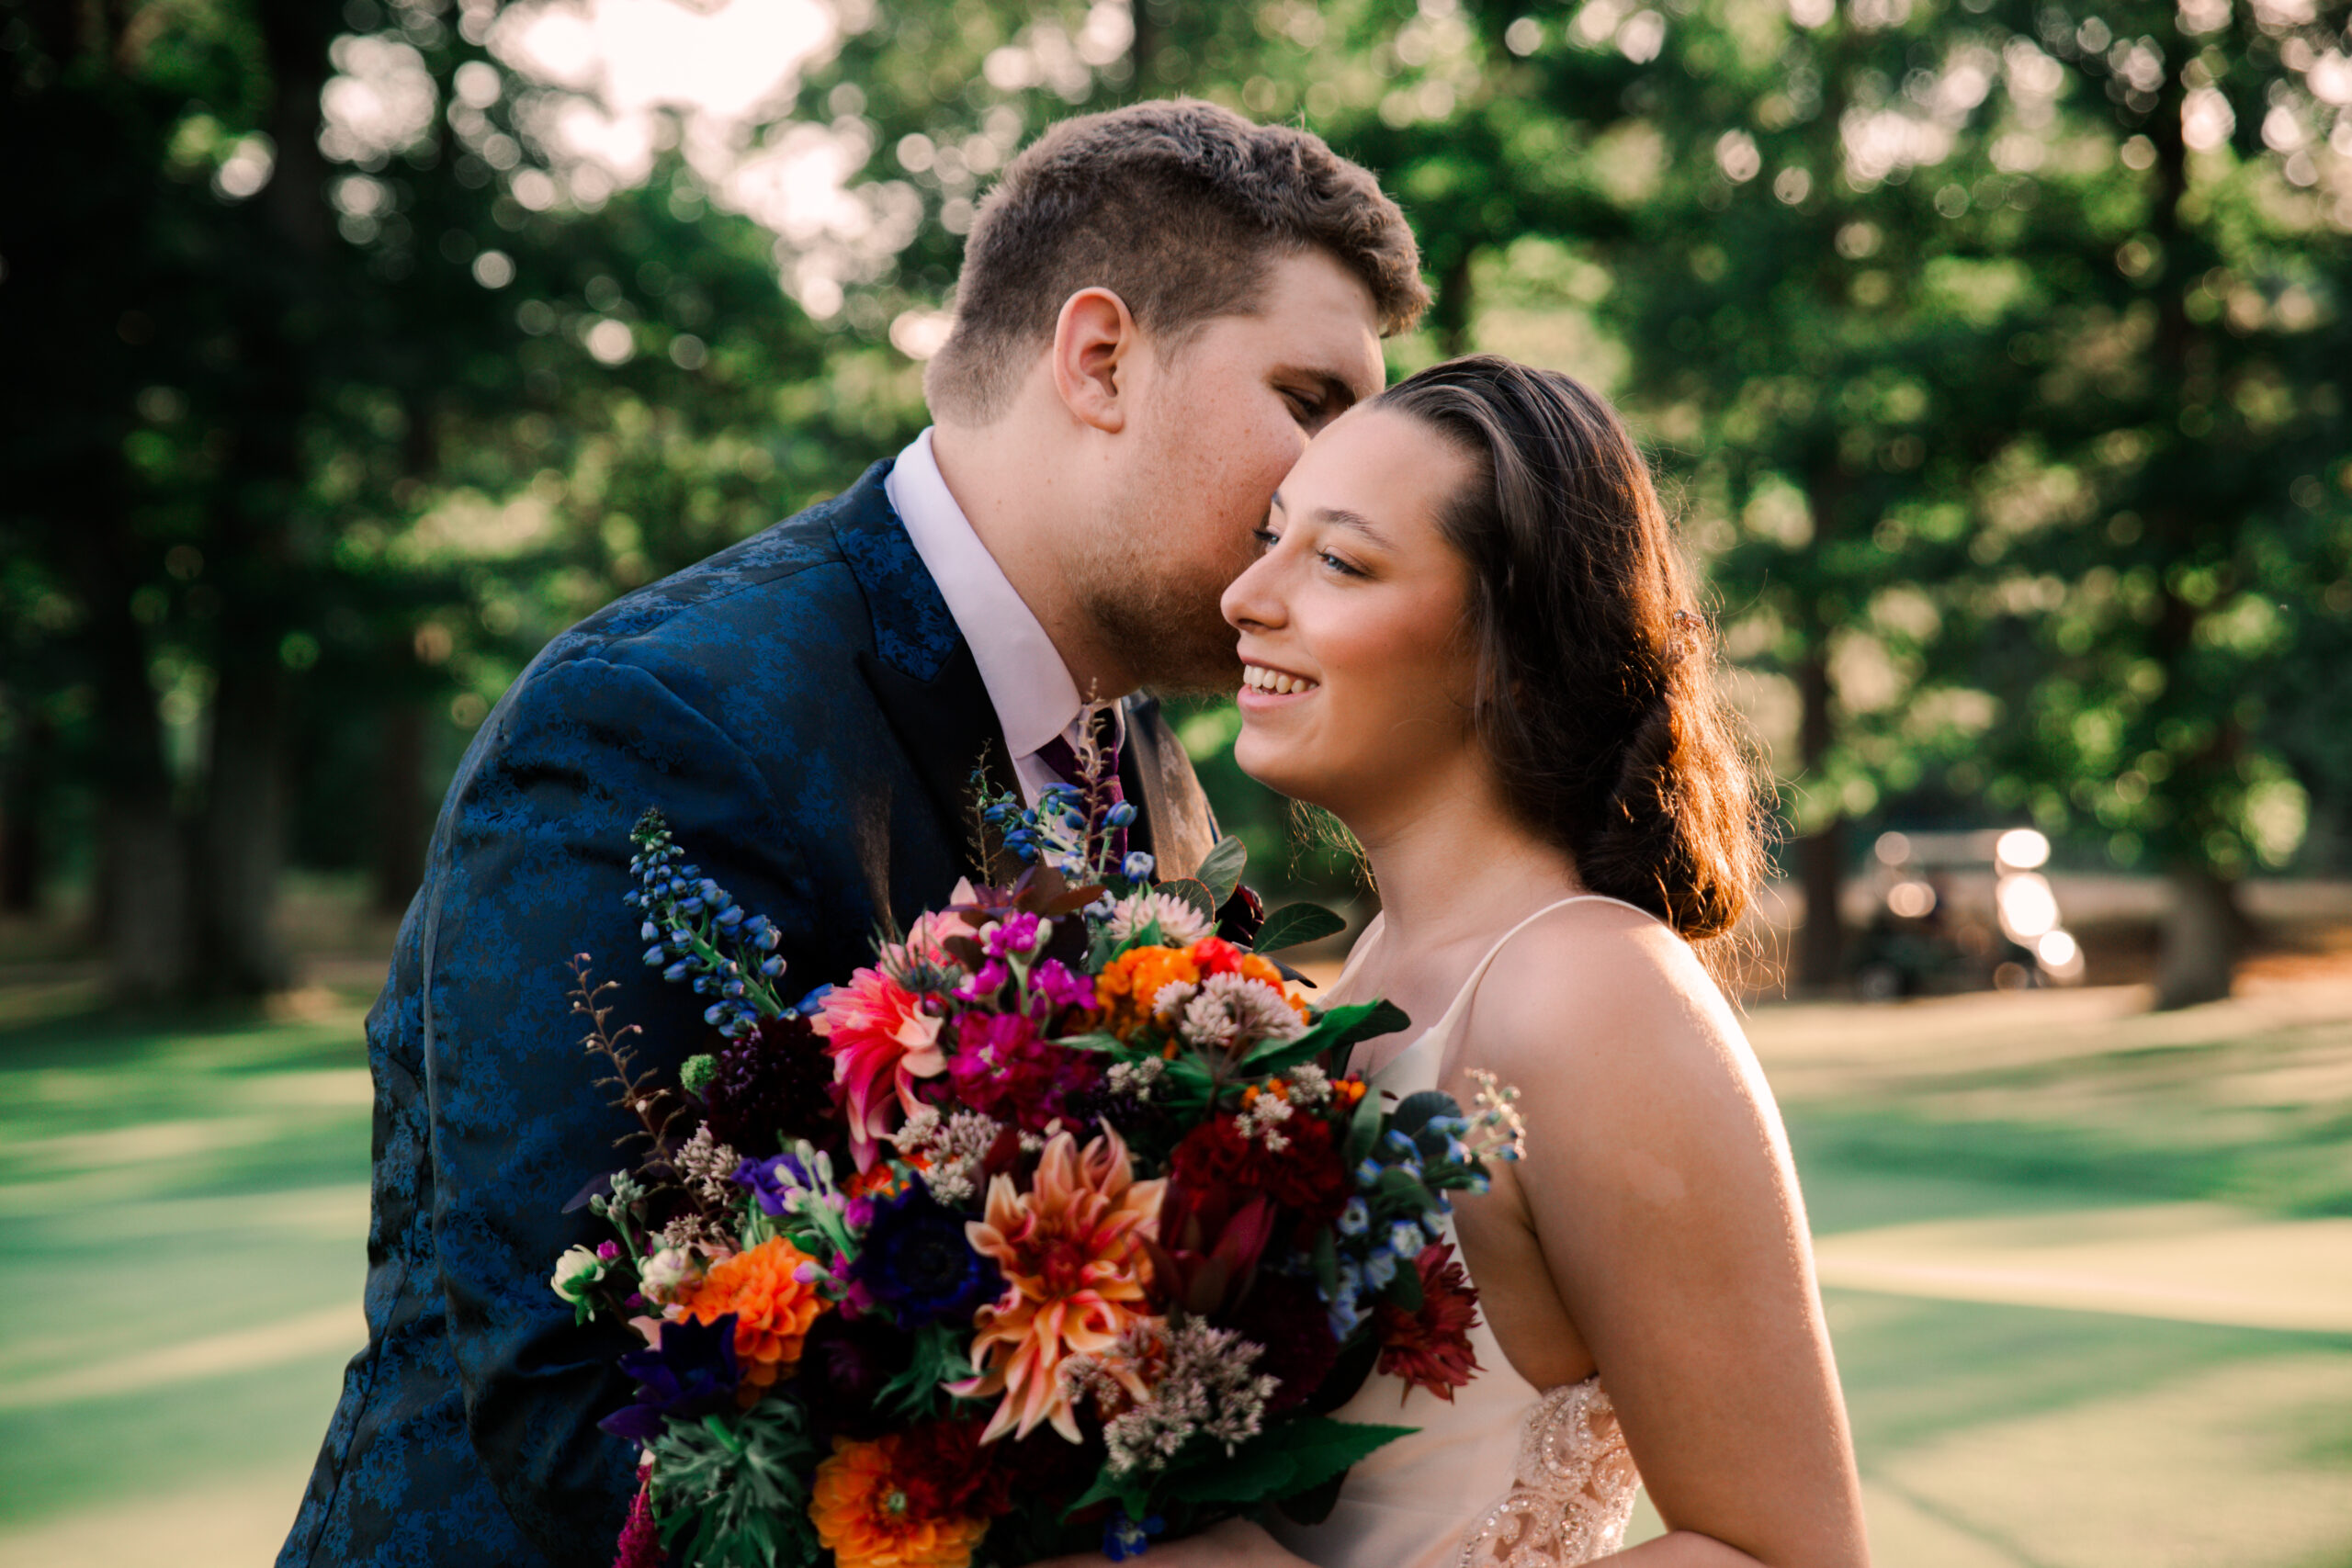 A couple getting married at Blue Hill Country Club in Canton, MA, posing with a colorful bouquet